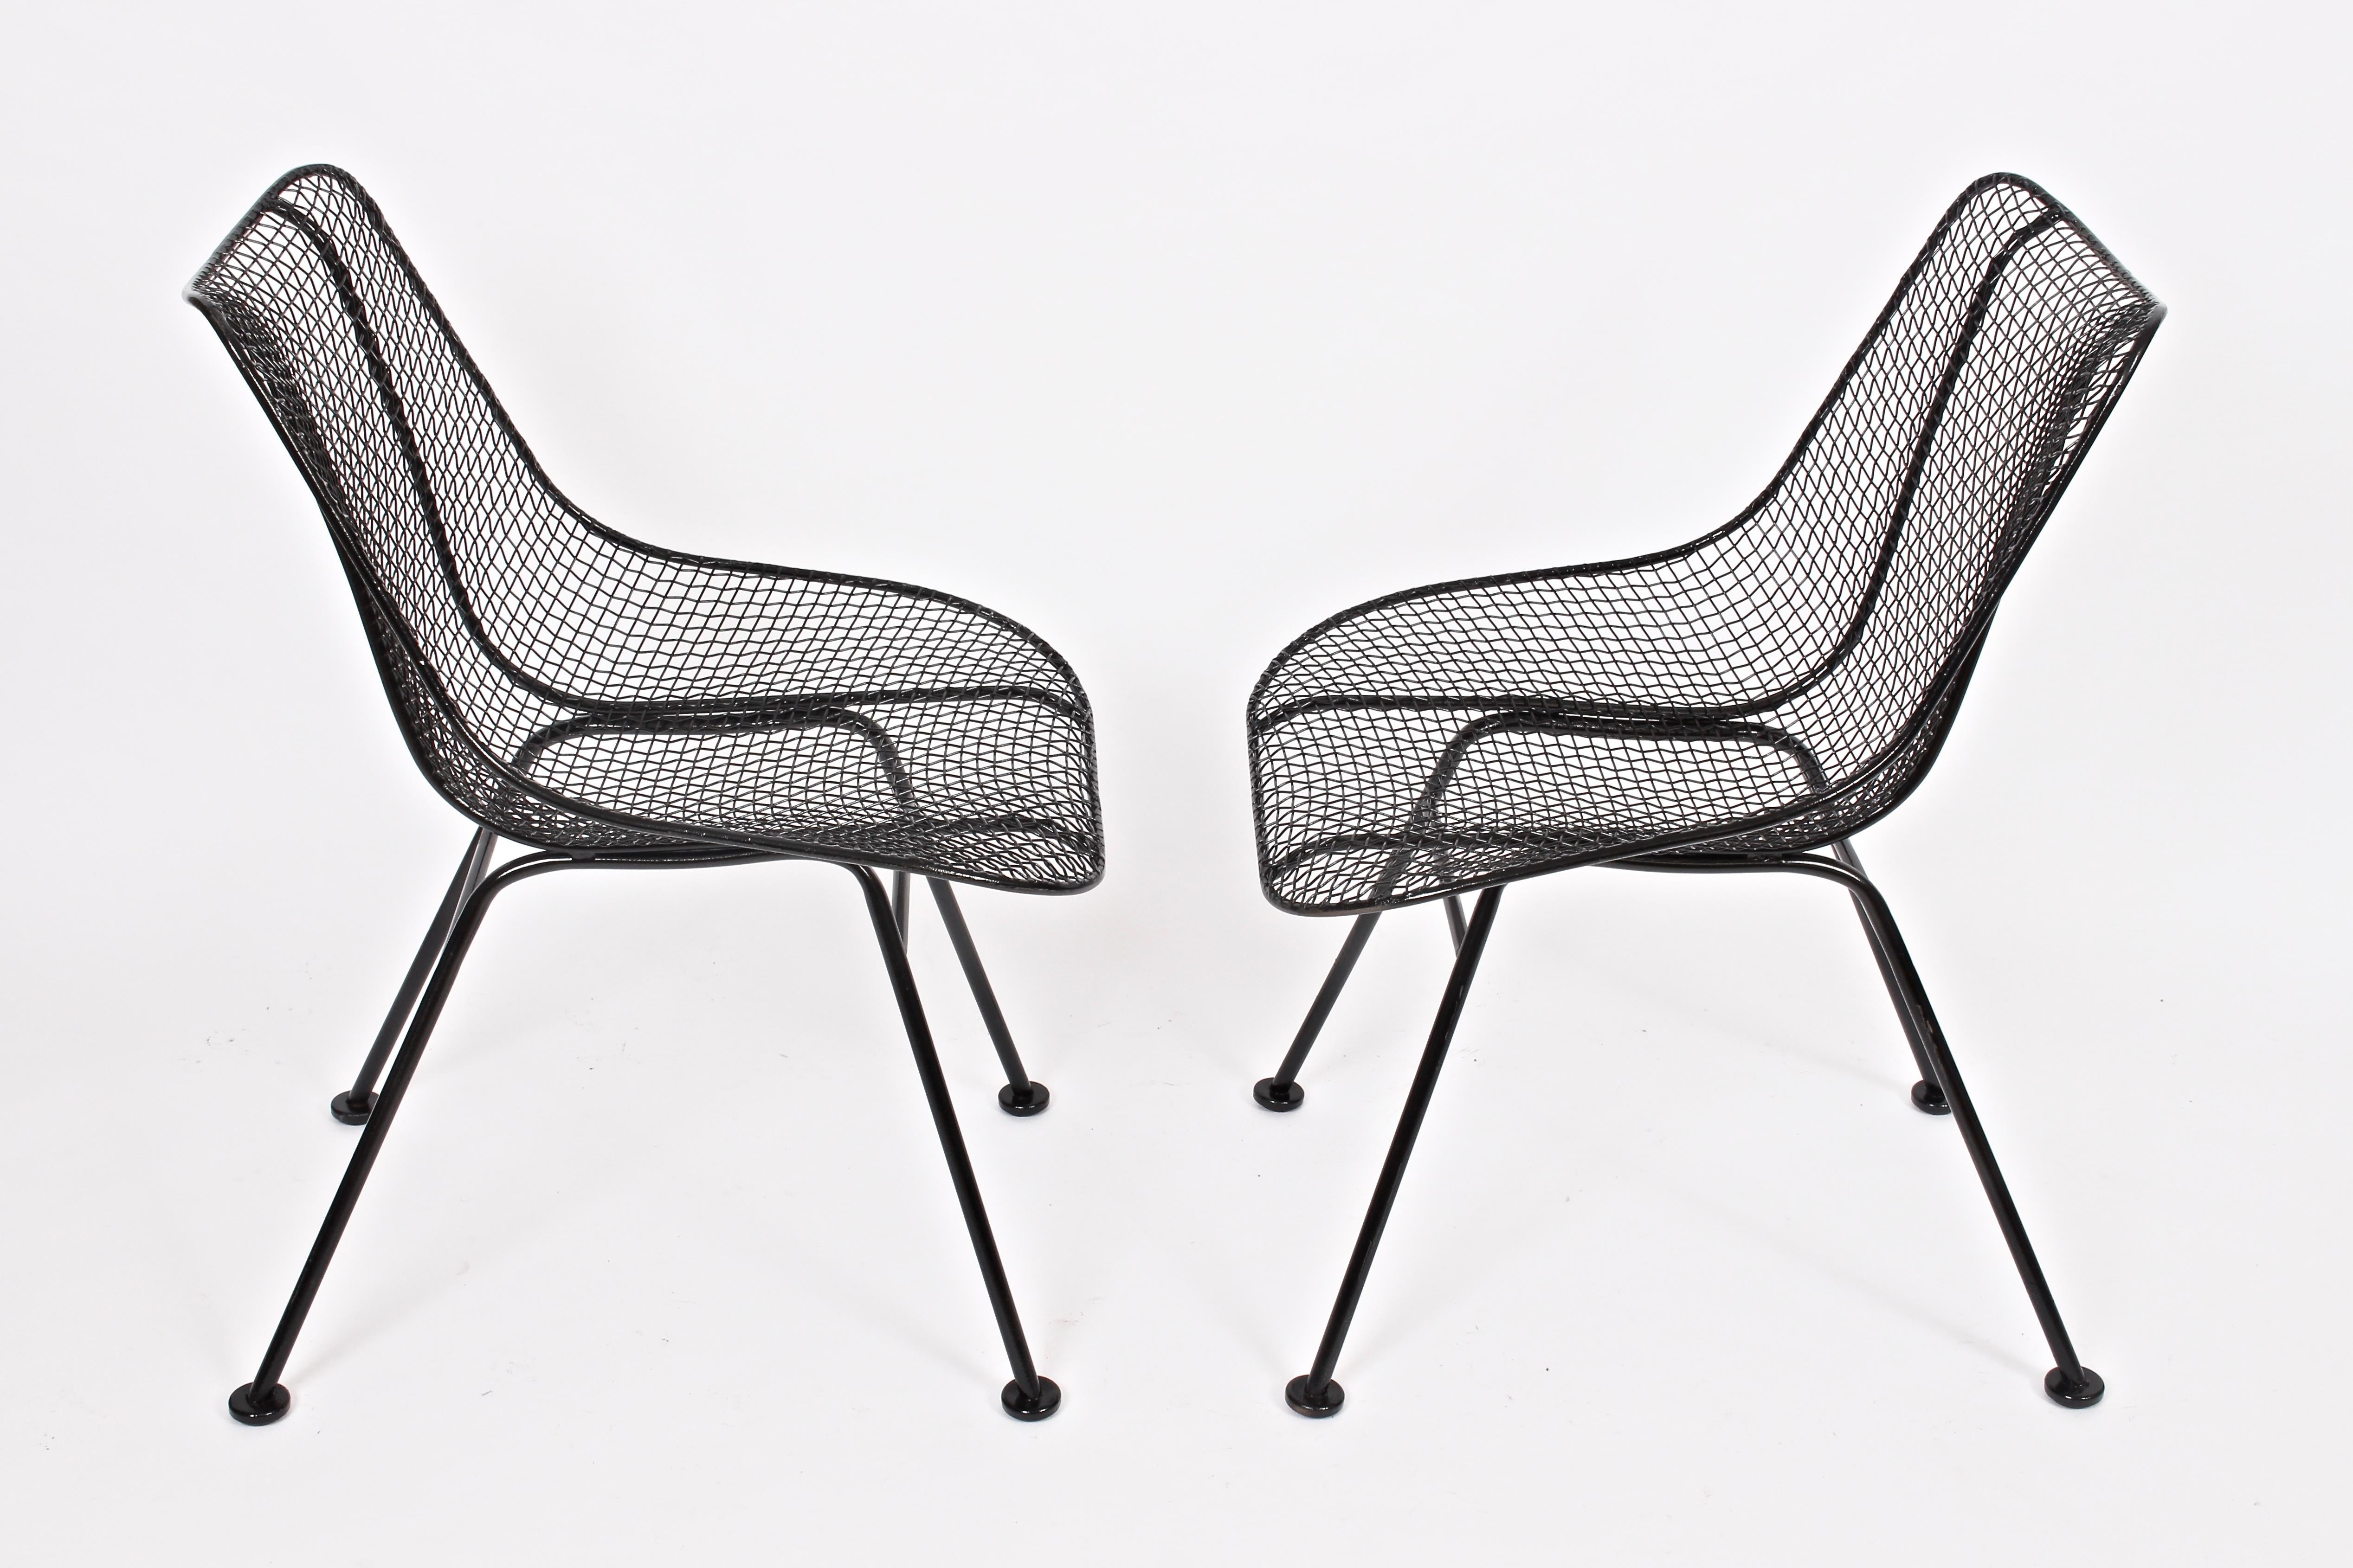 Original Pair of Russell Woodard black enamel Sculptura dining height side chairs, 1950's.  Handcrafted in wrought iron and woven wire mesh. Suitable for Indoor / Outdoor use. Professionally powder coated and coated in gloss black enamel paint. Like